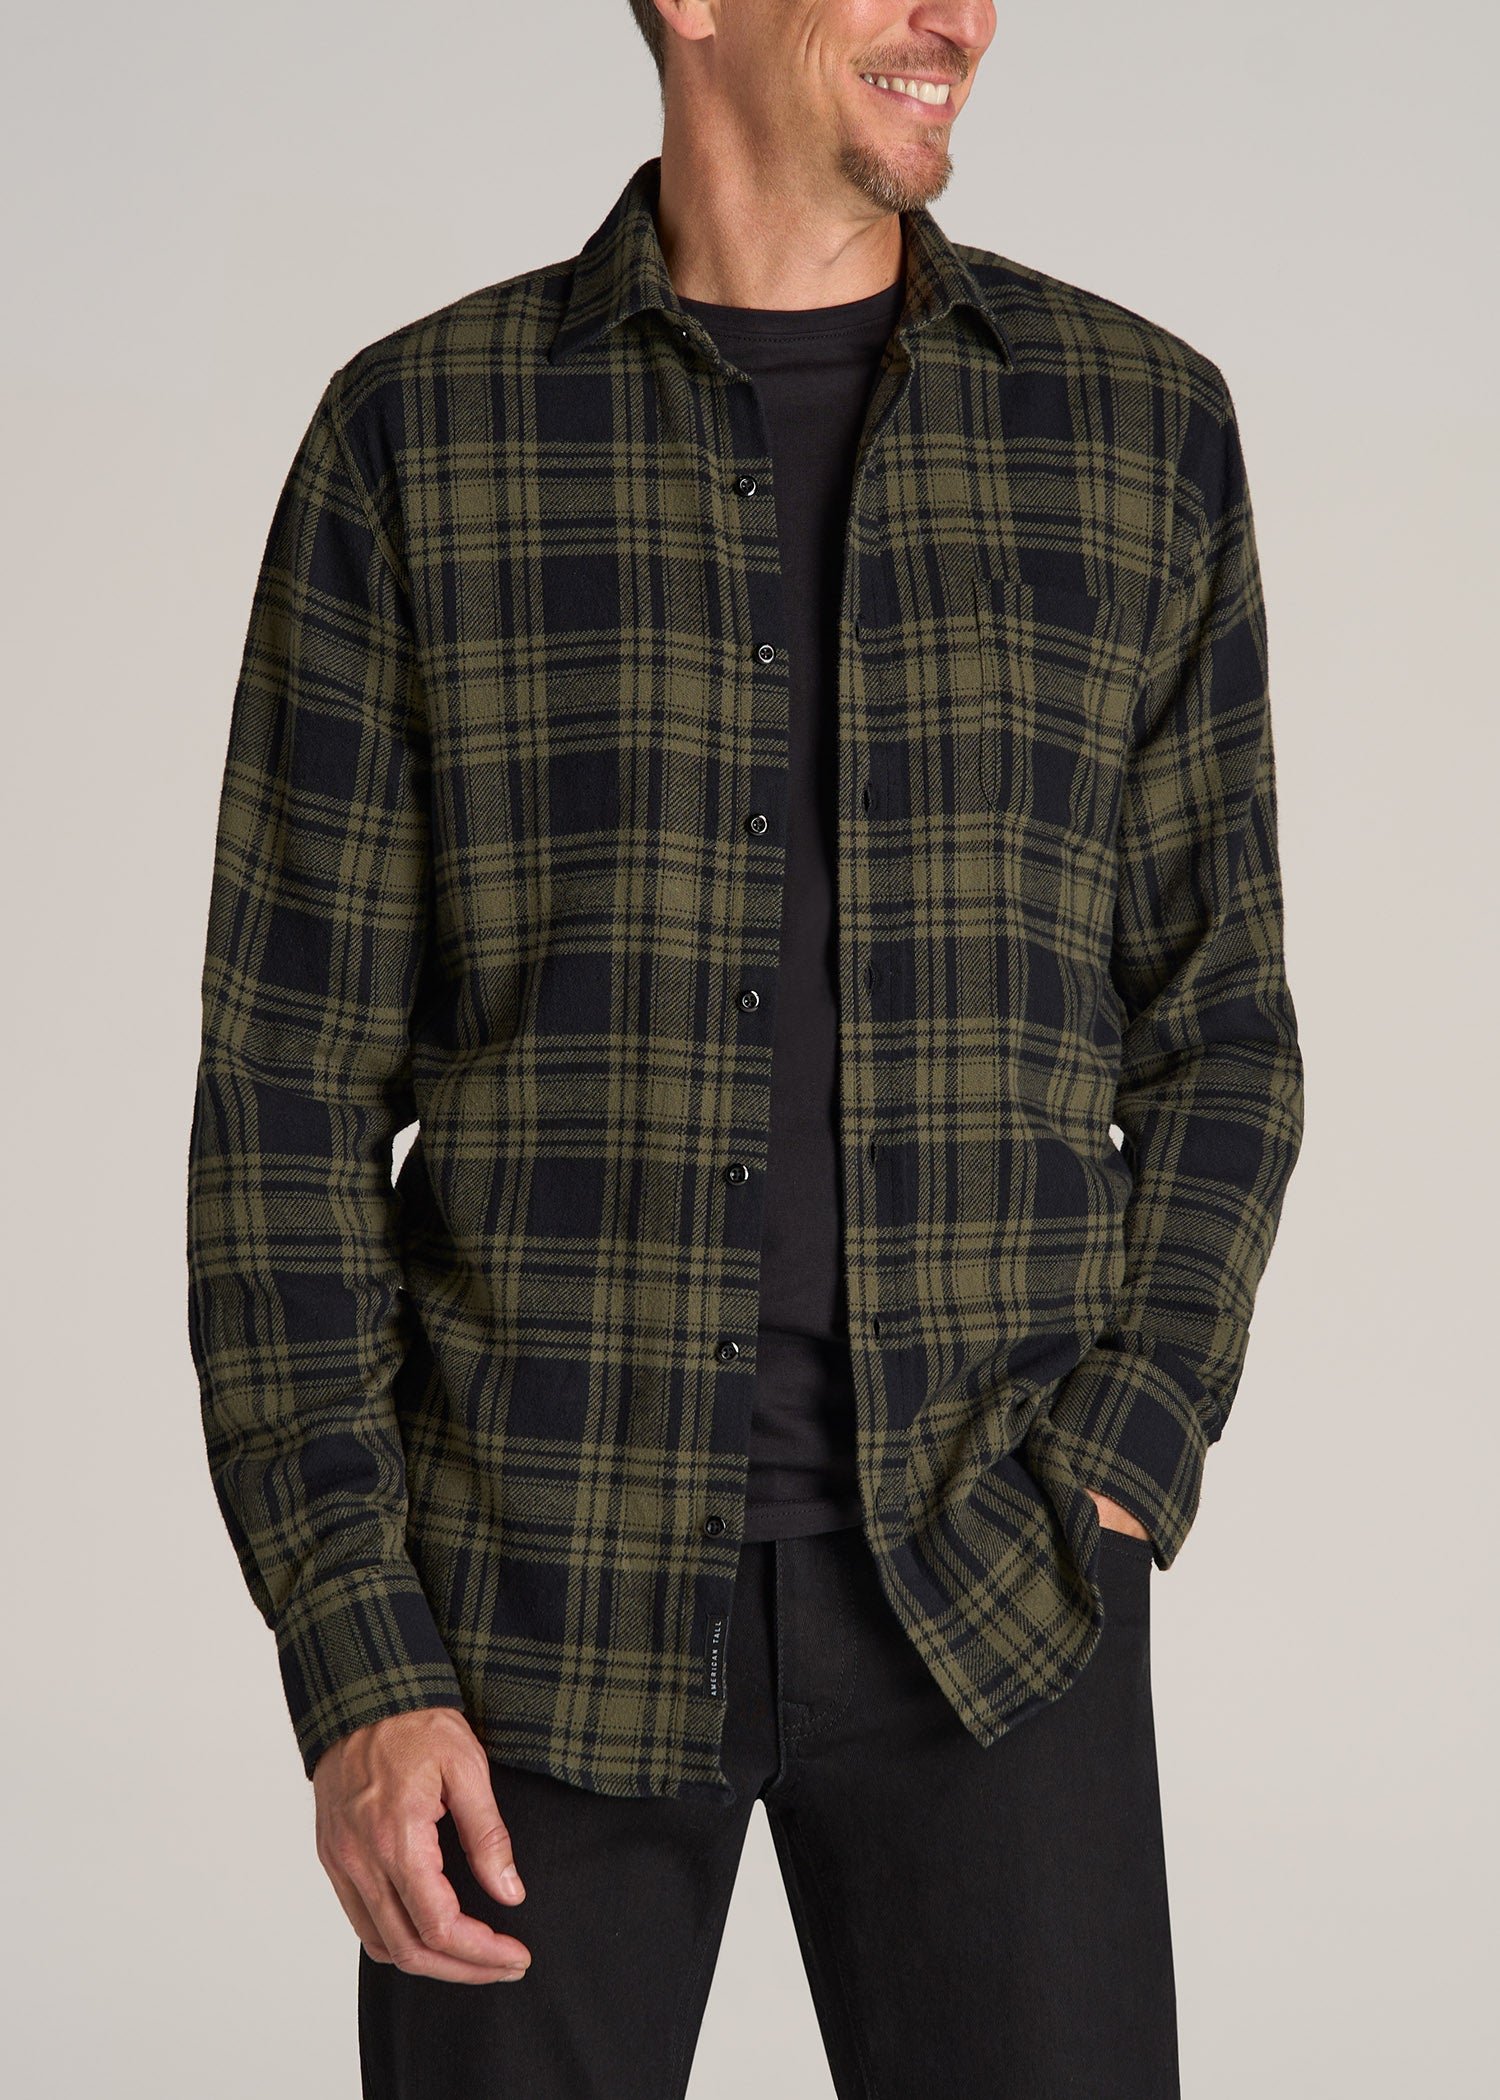 Nelson Flannel Shirt for Tall Men in Black and Green Plaid